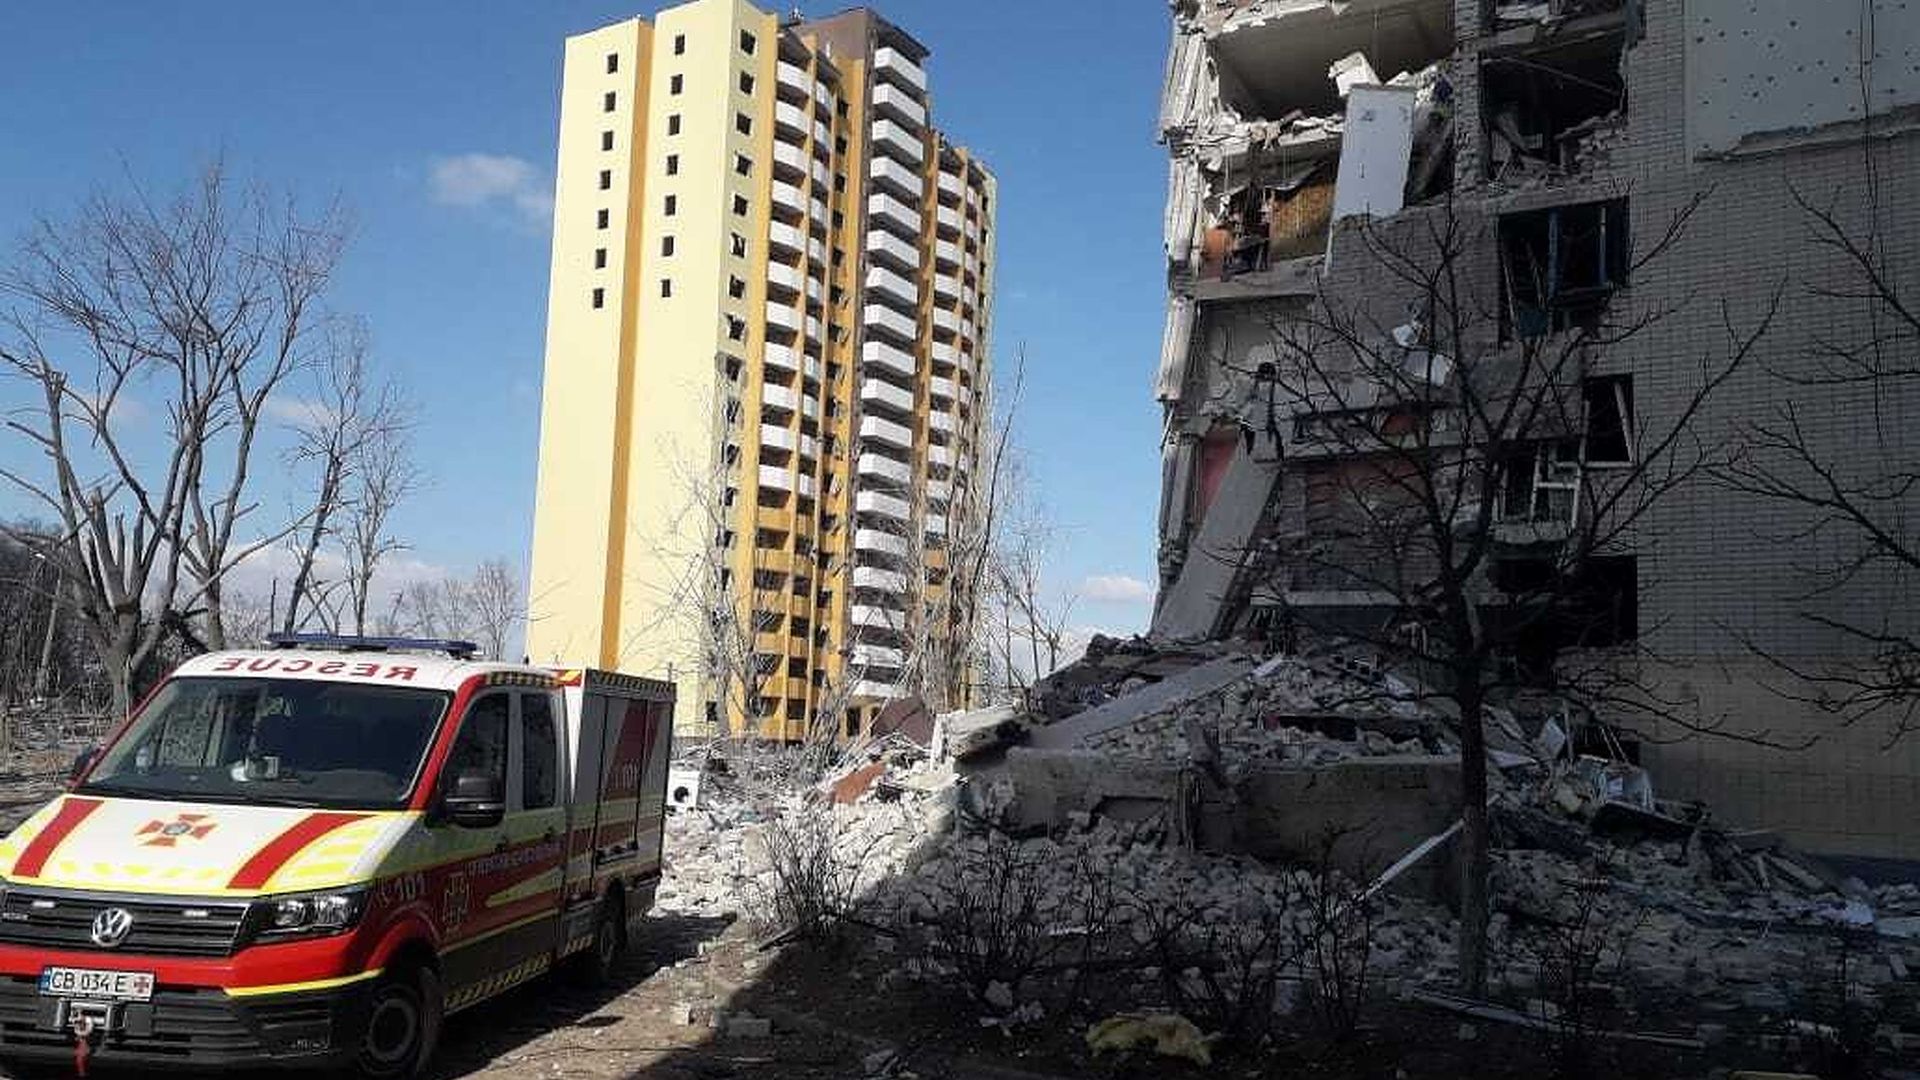 An ambulance stands ready by a damaged residential building after a Russian attack in Chernihiv, Ukraine on March 17.